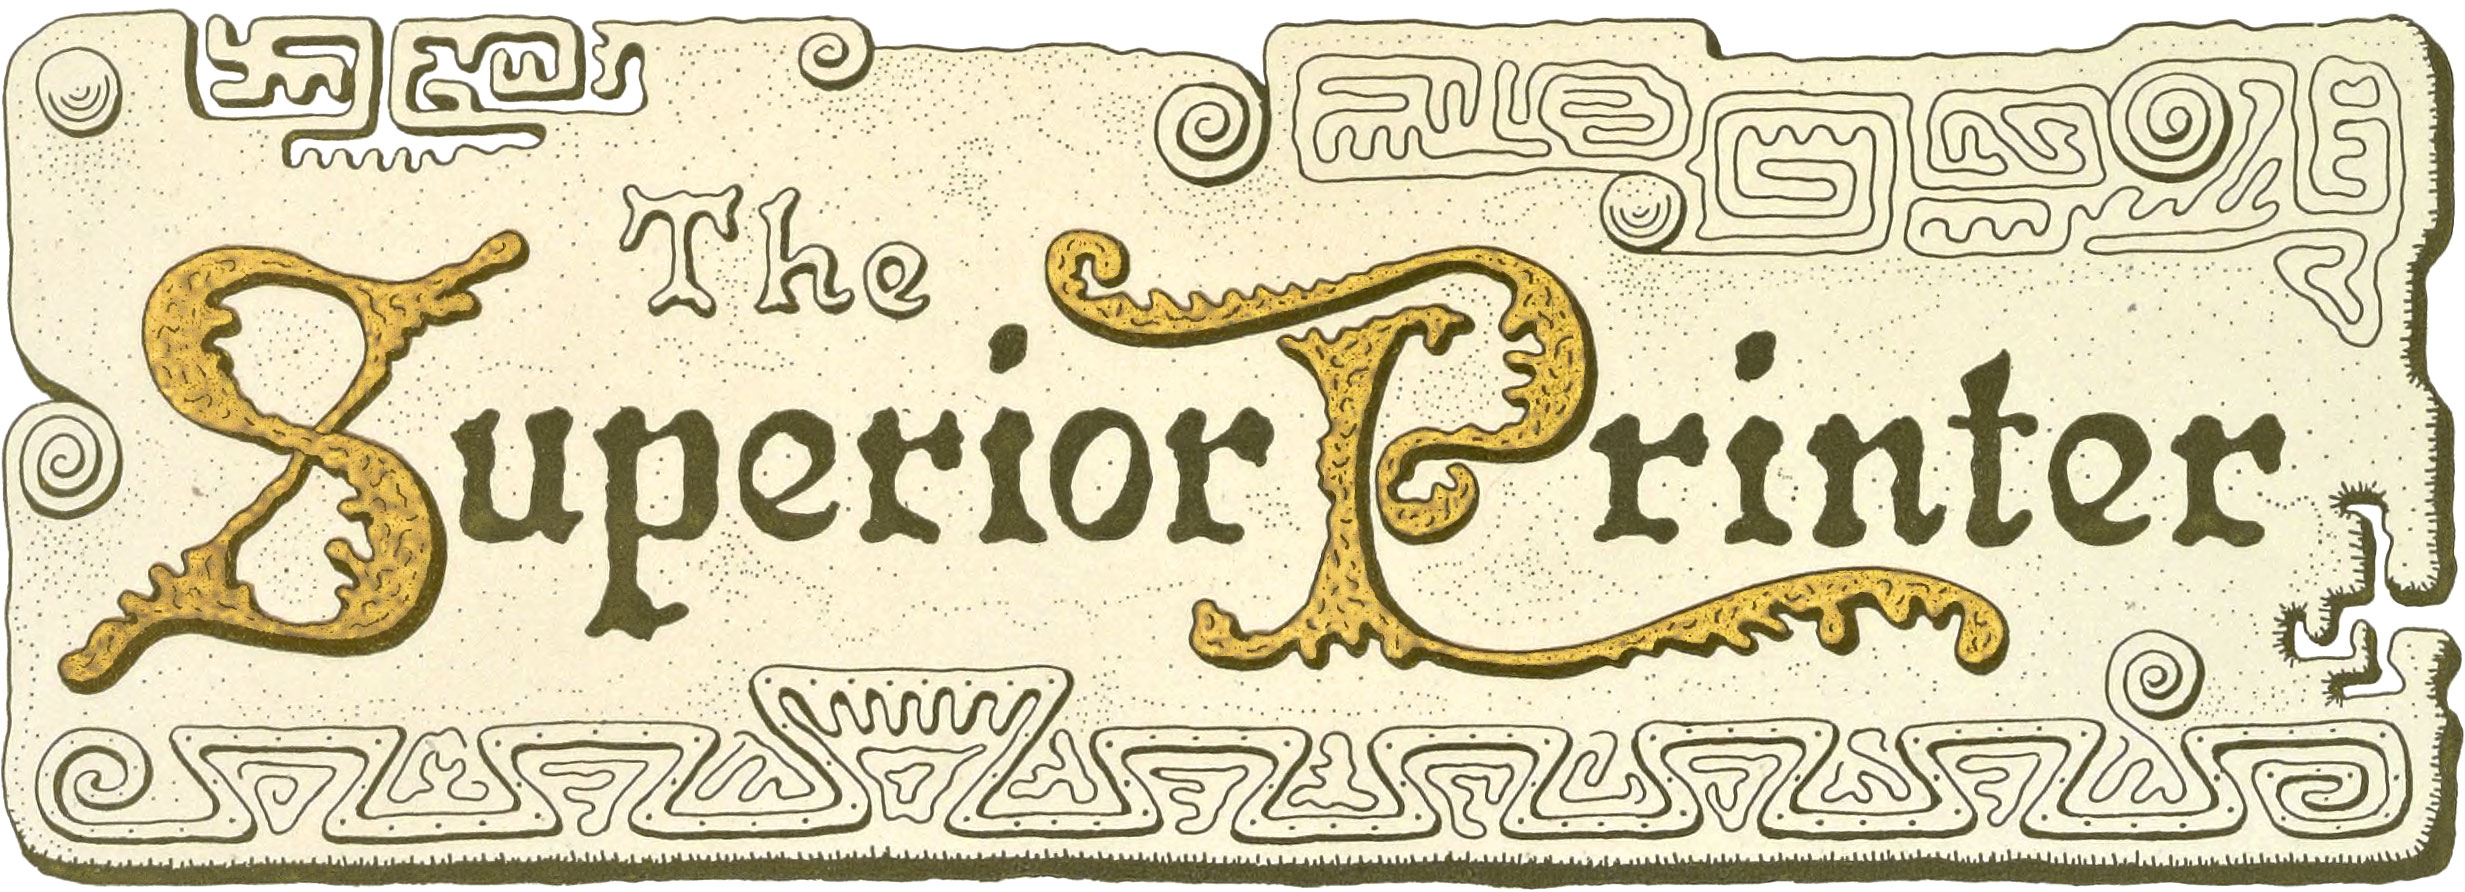 Illustration of a stone-like title with tan and dark green with the words 'The Superior Printer' in gold